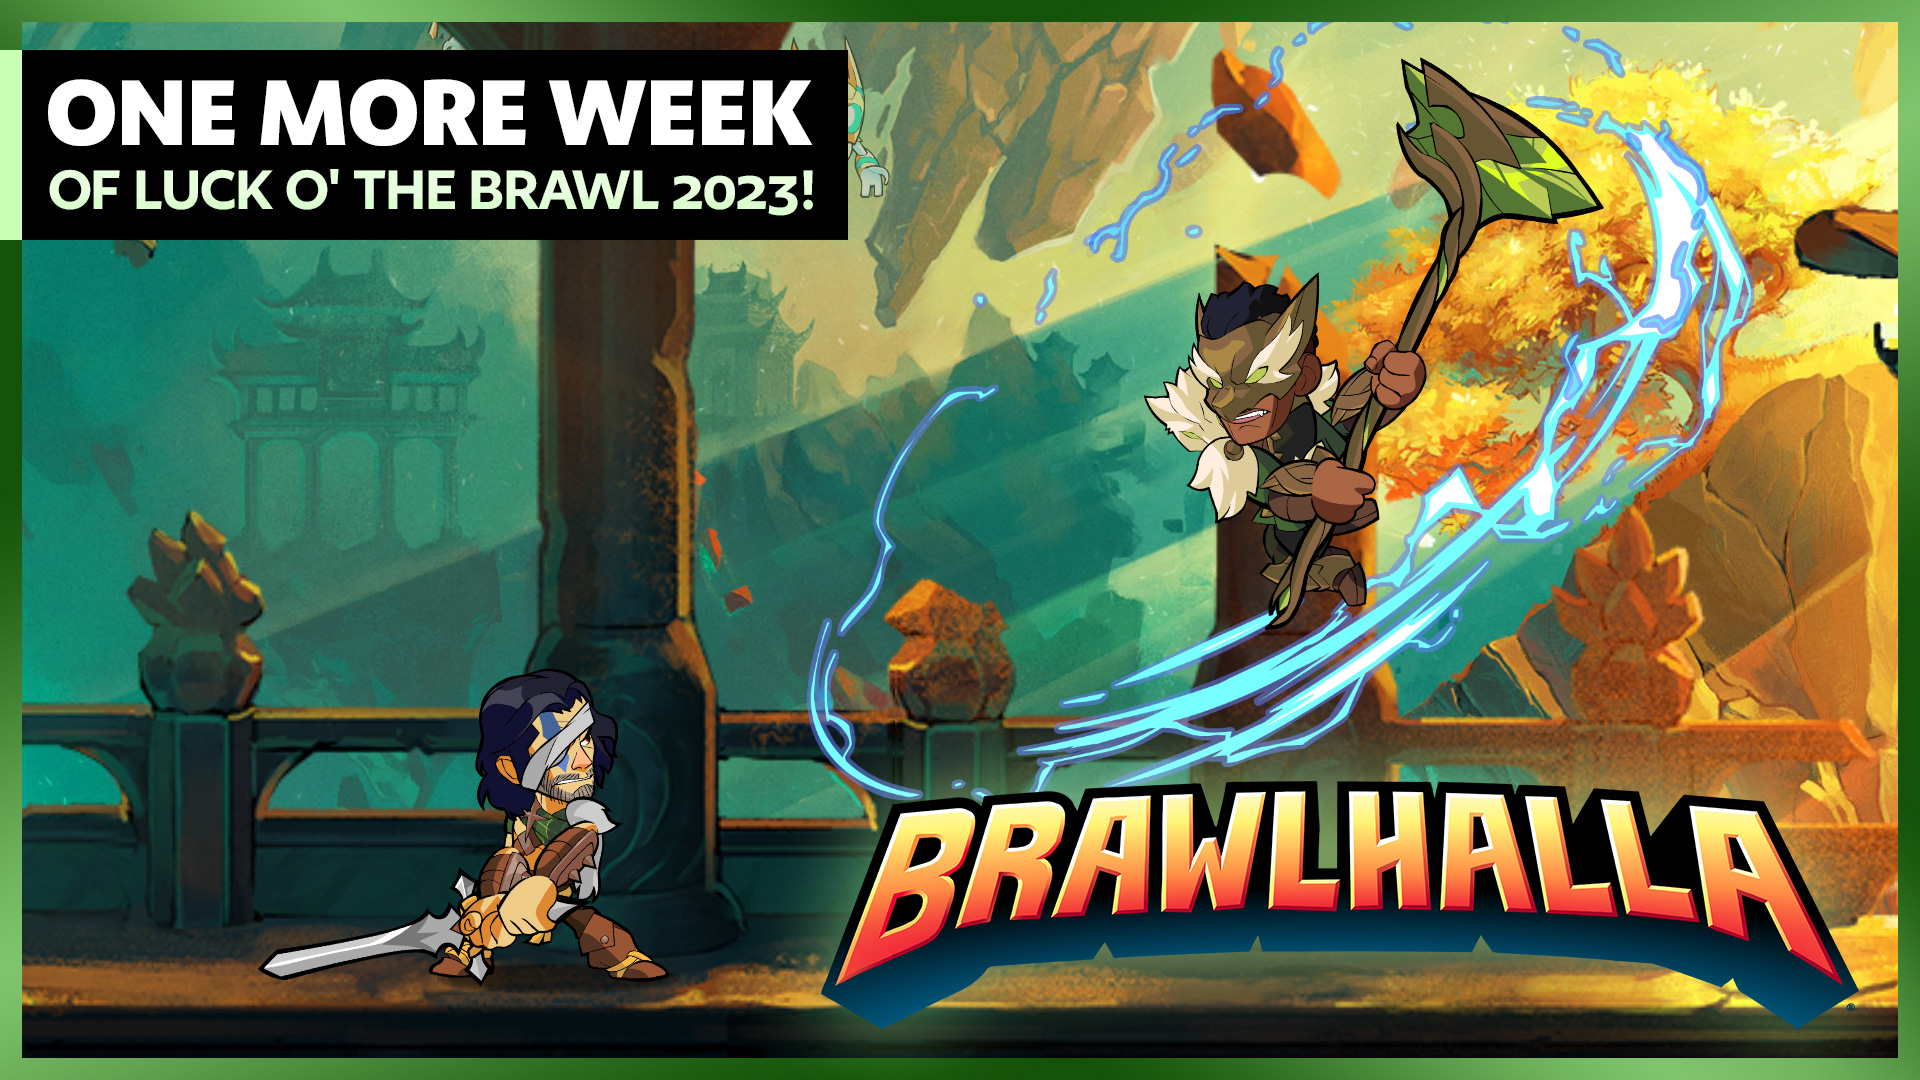 One More Week of Luck o’ the Brawl 2023!